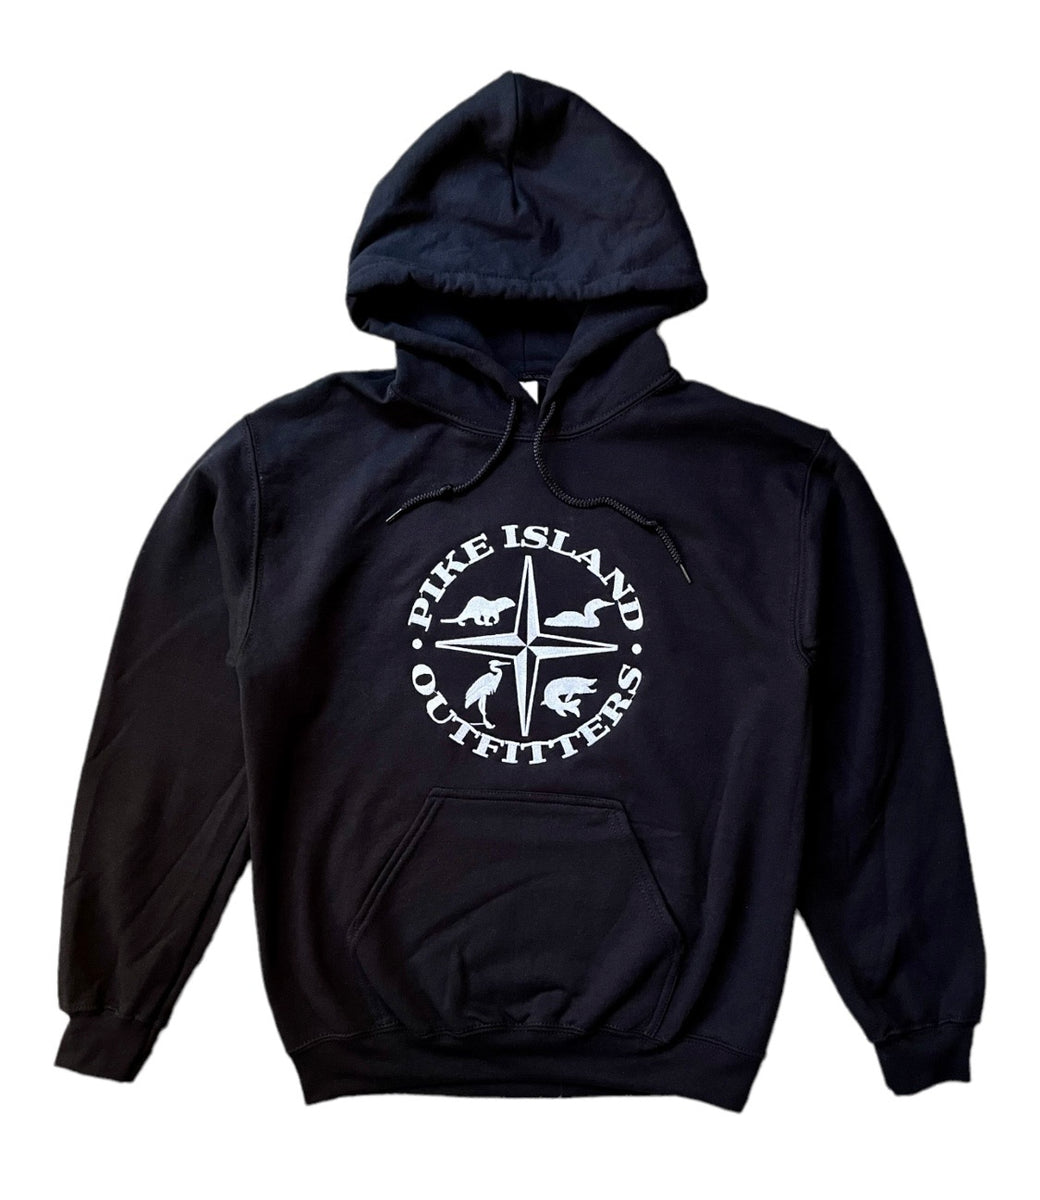 Sweaters & Hoodies, Pike Island Outfitters